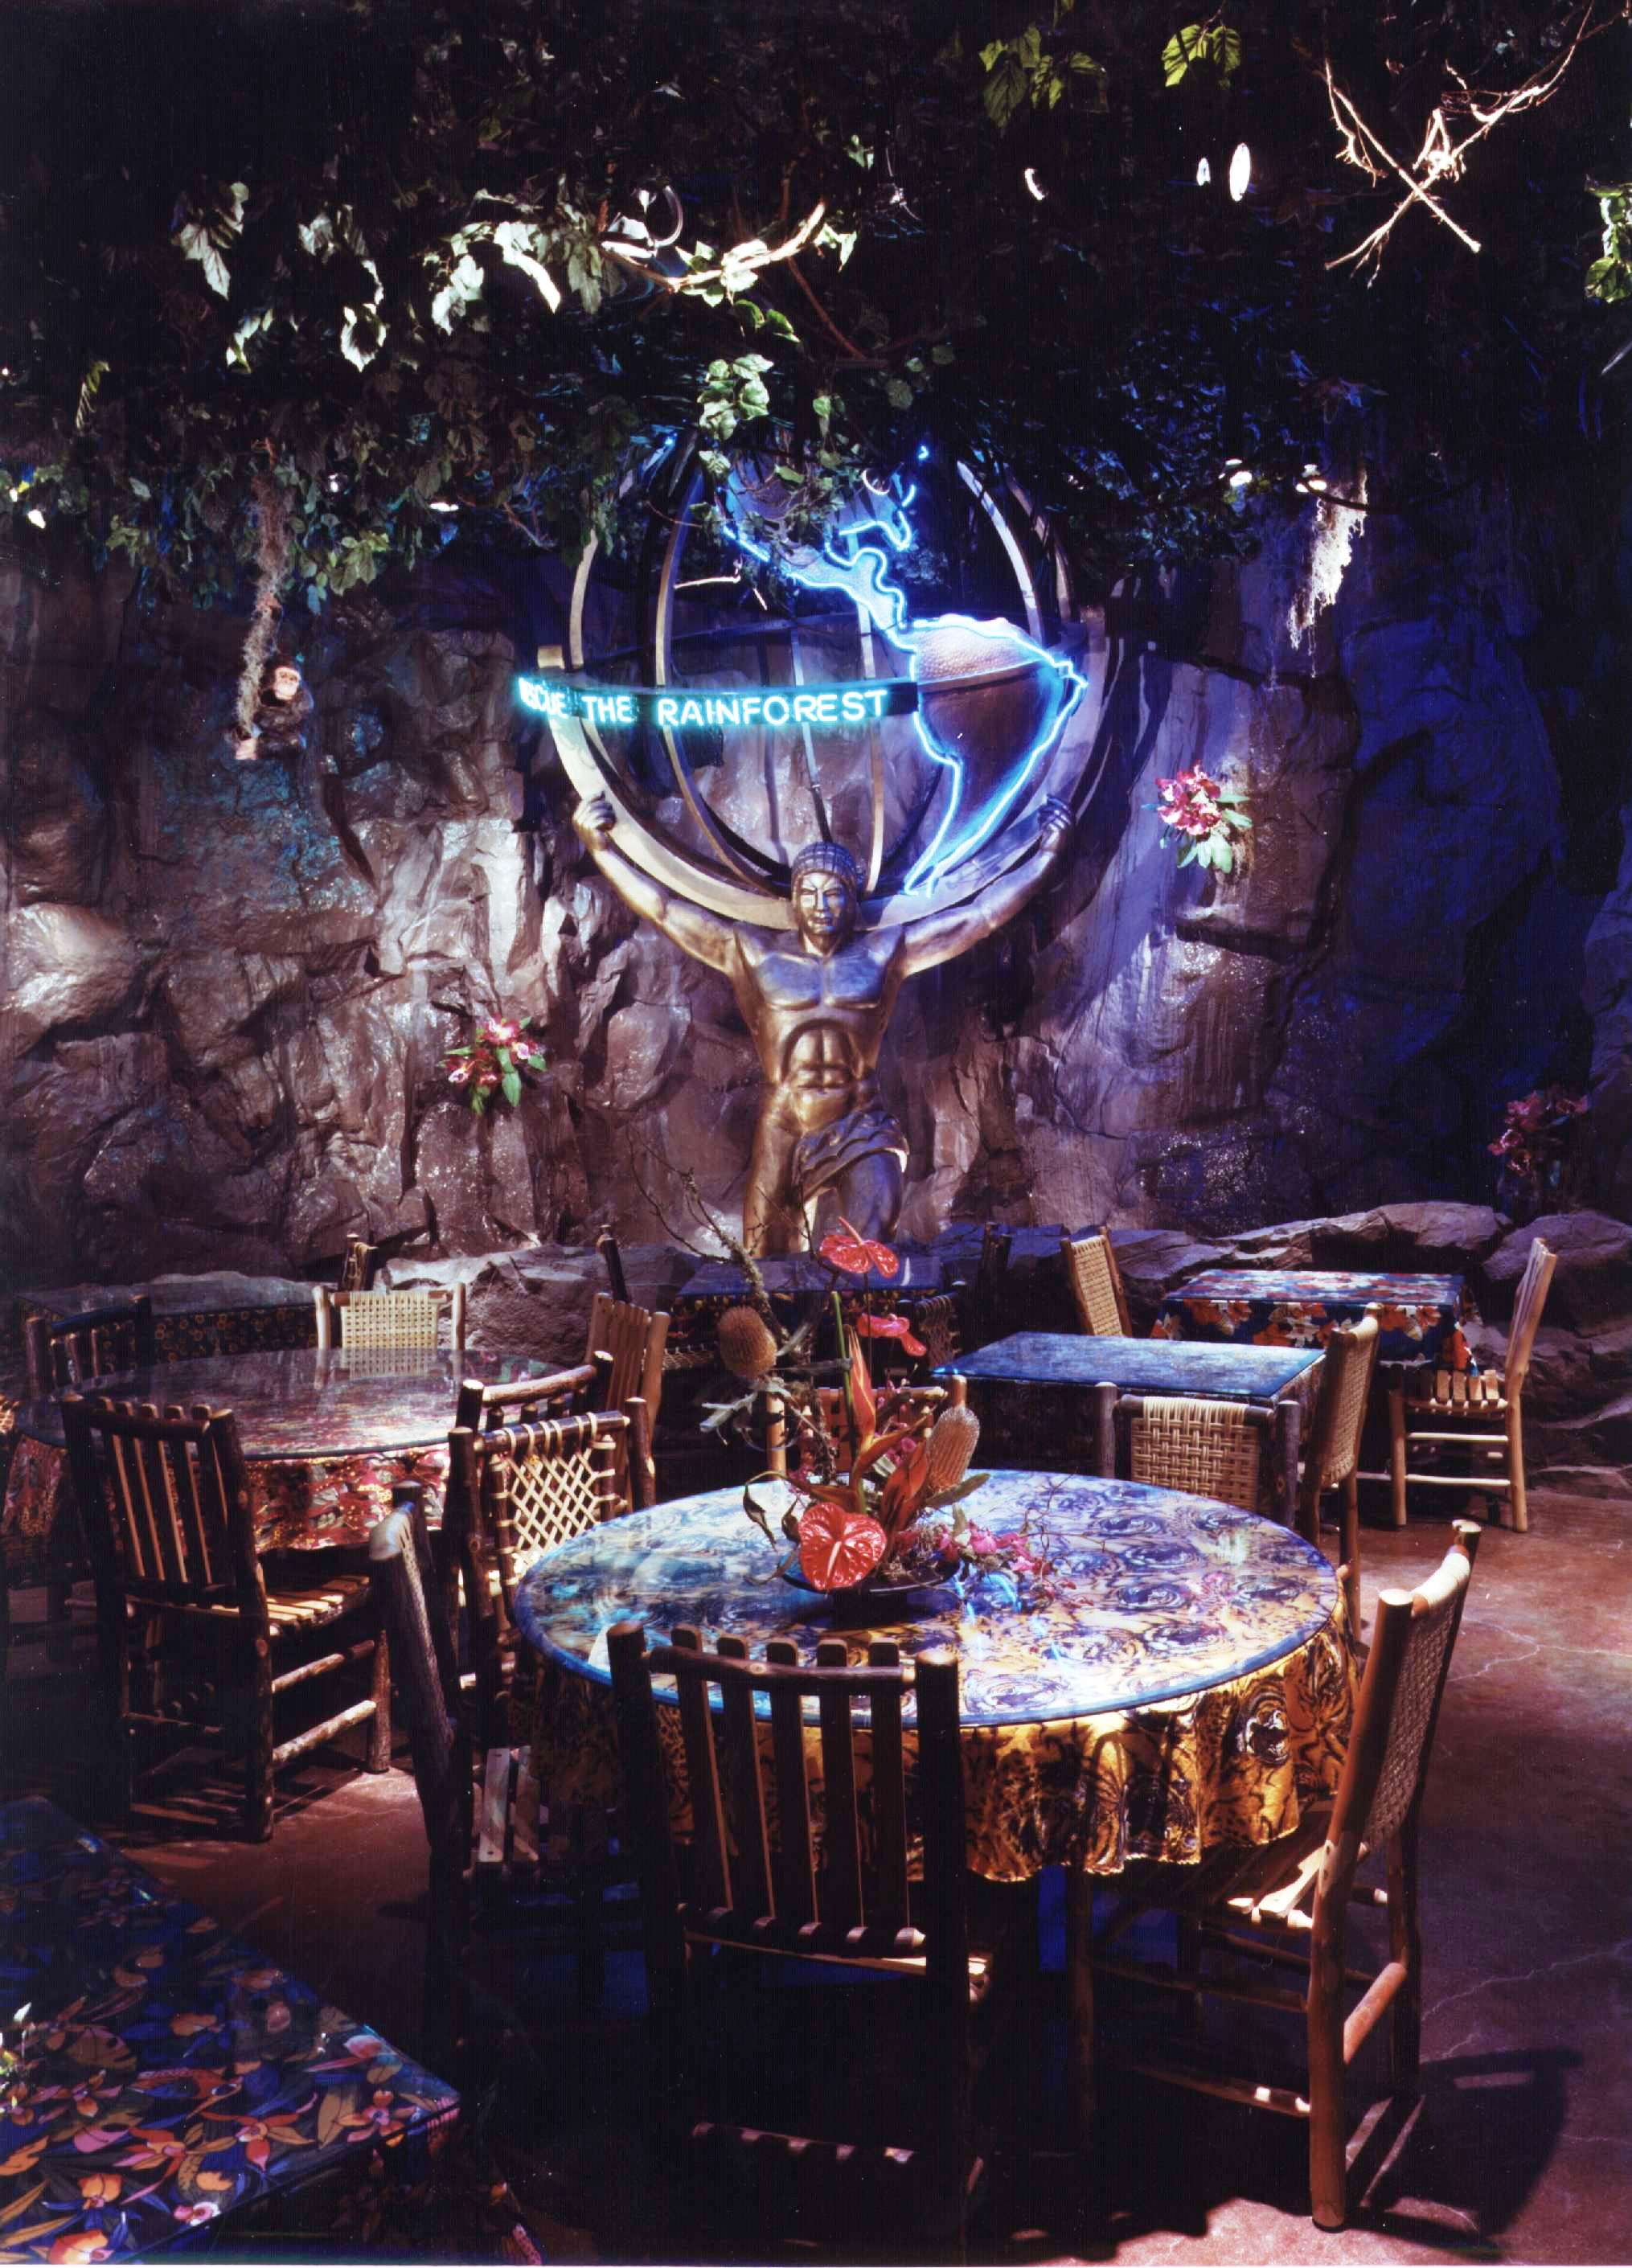 Rainforest Cafe - Constructed by Retail Construction Services, Inc. - Food and Beverage Contractor